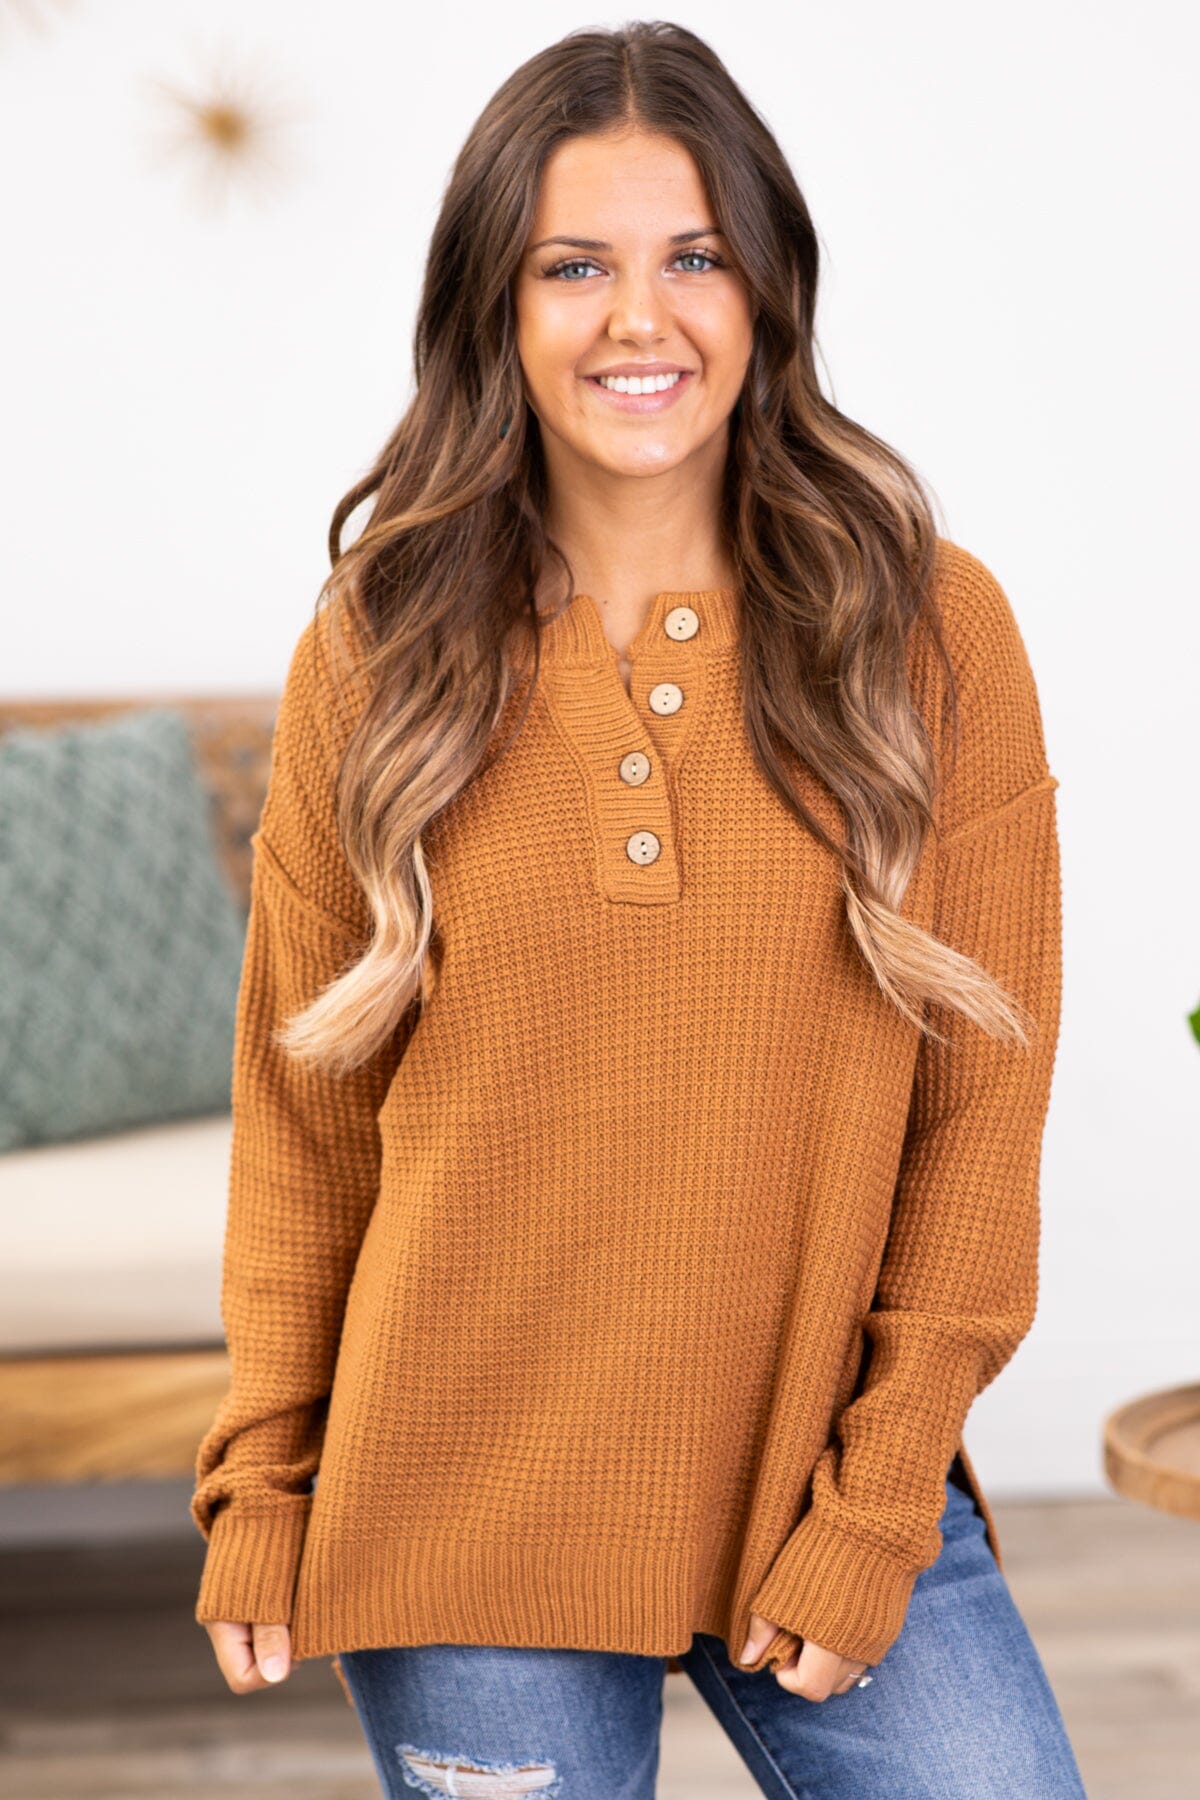 Cinnamon Waffle Knit Sweater With Buttons - Filly Flair